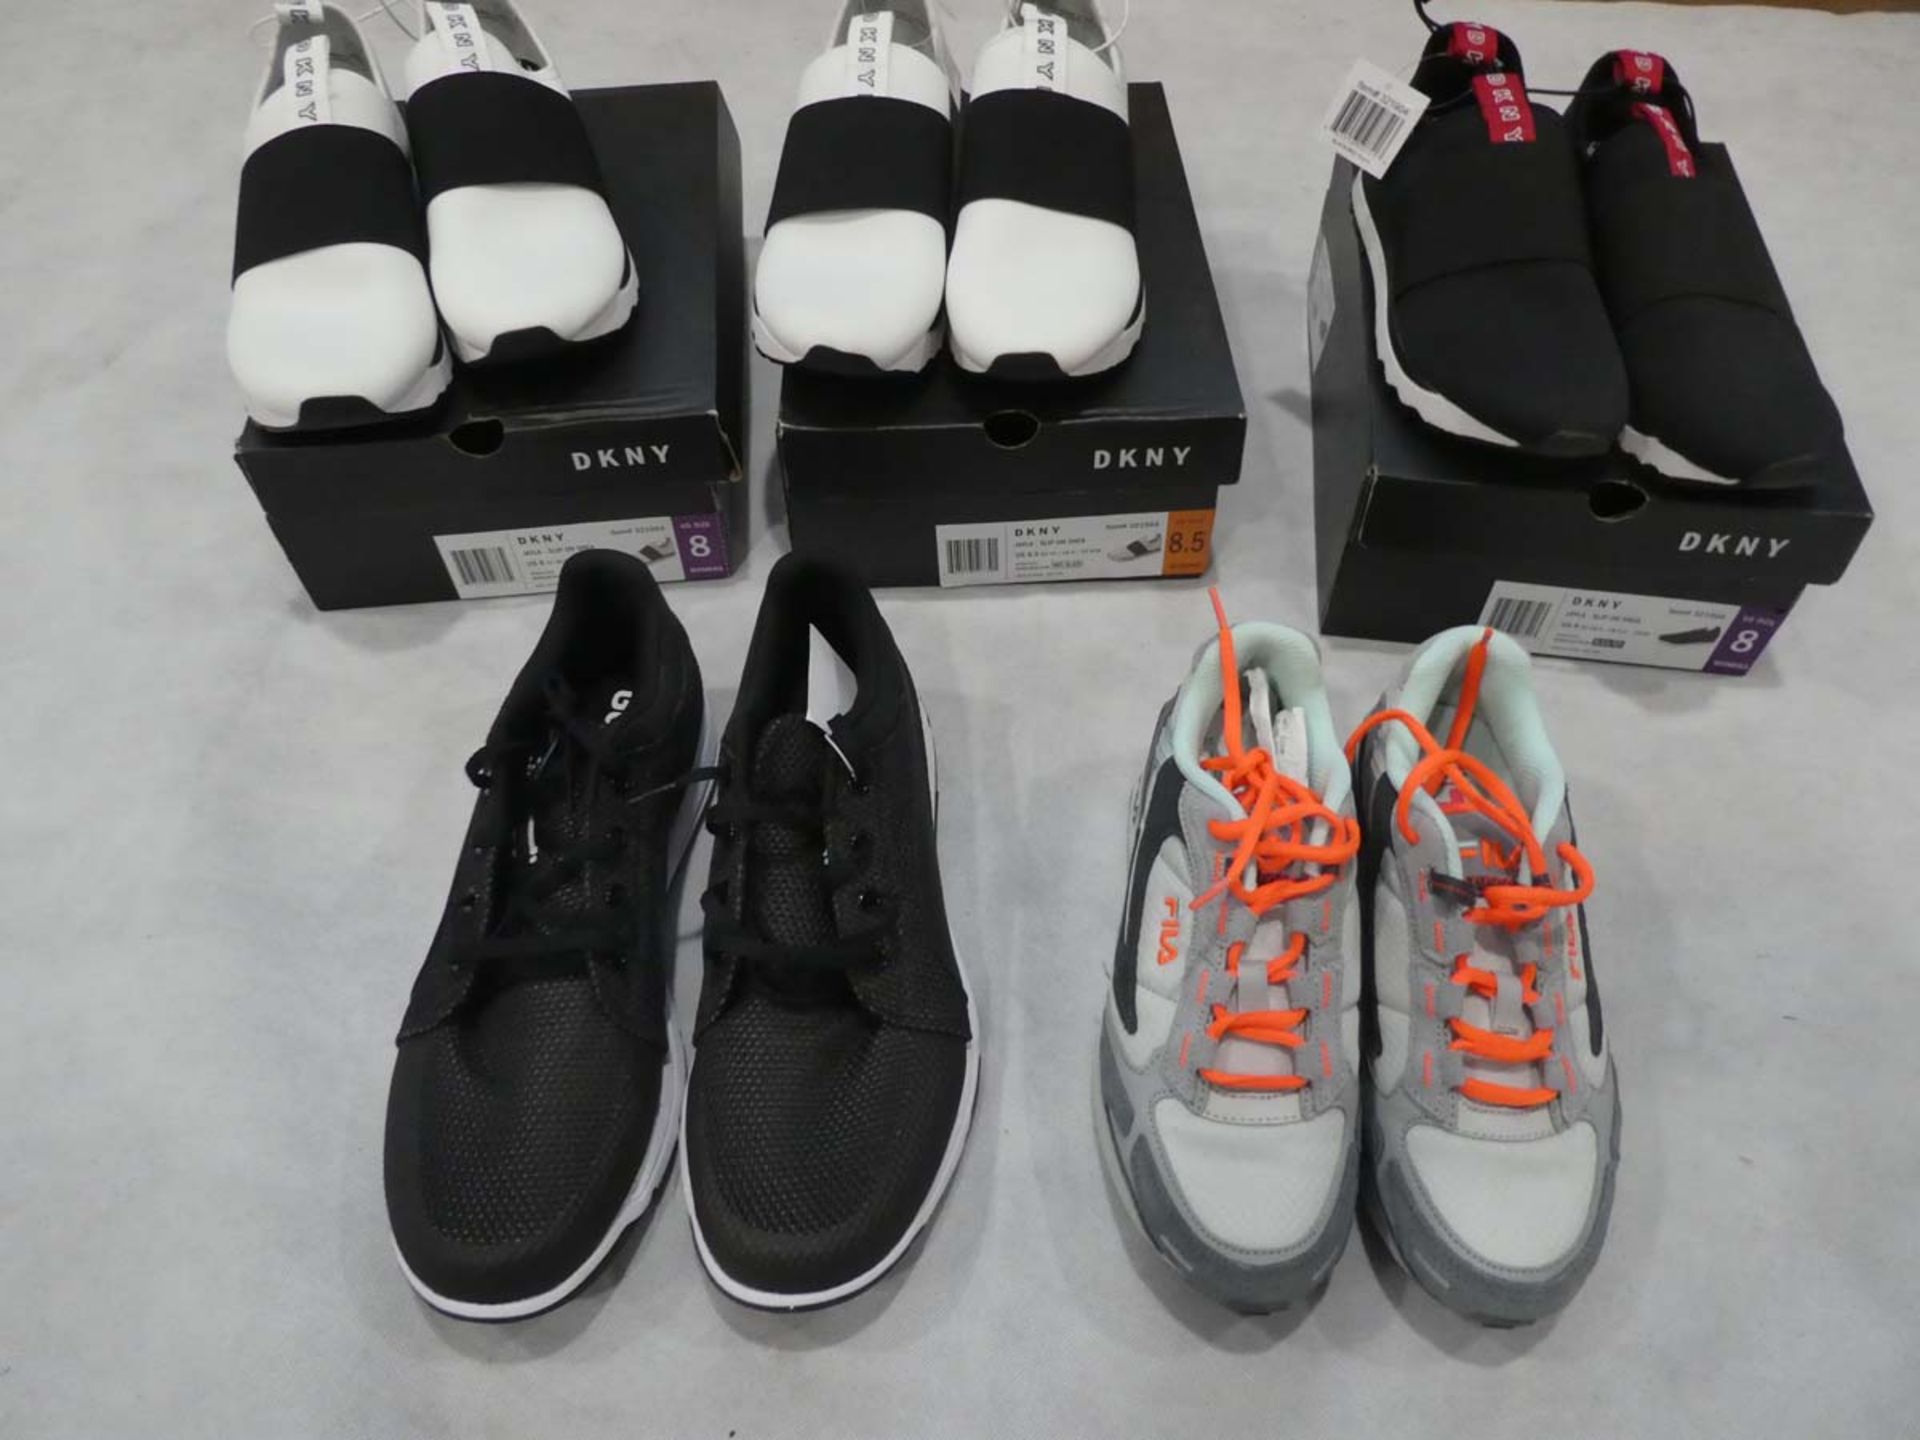 5 Boxed pairs of trainers shoes to include DKNY, Puma & Fila in various sizes